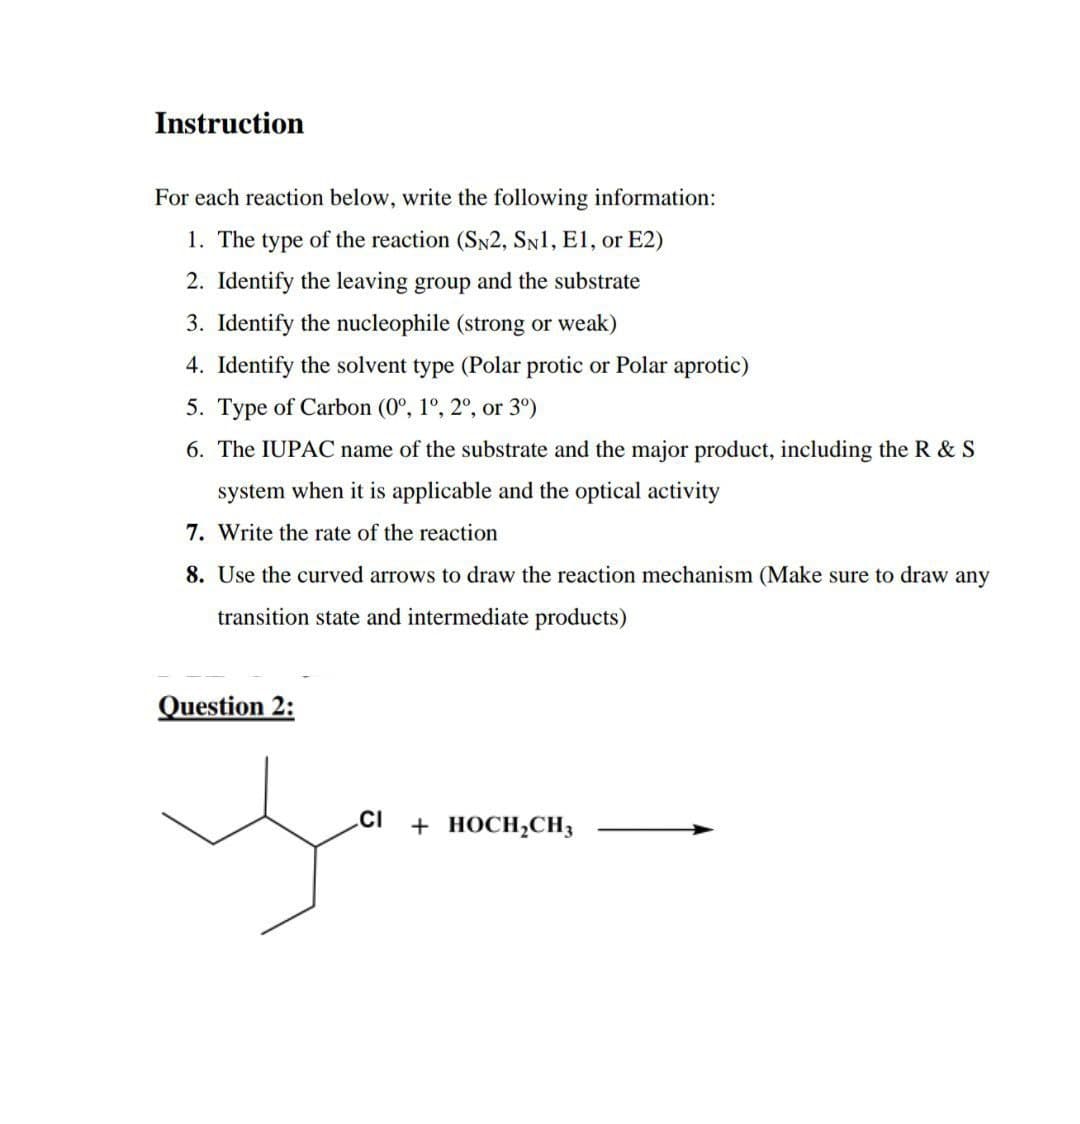 Instruction
For each reaction below, write the following information:
1. The type of the reaction (SN2, SN1, E1, or E2)
2. Identify the leaving group and the substrate
3. Identify the nucleophile (strong or weak)
4. Identify the solvent type (Polar protic or Polar aprotic)
5. Type of Carbon (0º, 1º, 2º, or 3°)
6. The IUPAC name of the substrate and the major product, including the R & S
system when it is applicable and the optical activity
7. Write the rate of the reaction
8. Use the curved arrows to draw the reaction mechanism (Make sure to draw any
transition state and intermediate products)
Question 2:
yo
CI + HOCH₂CH3